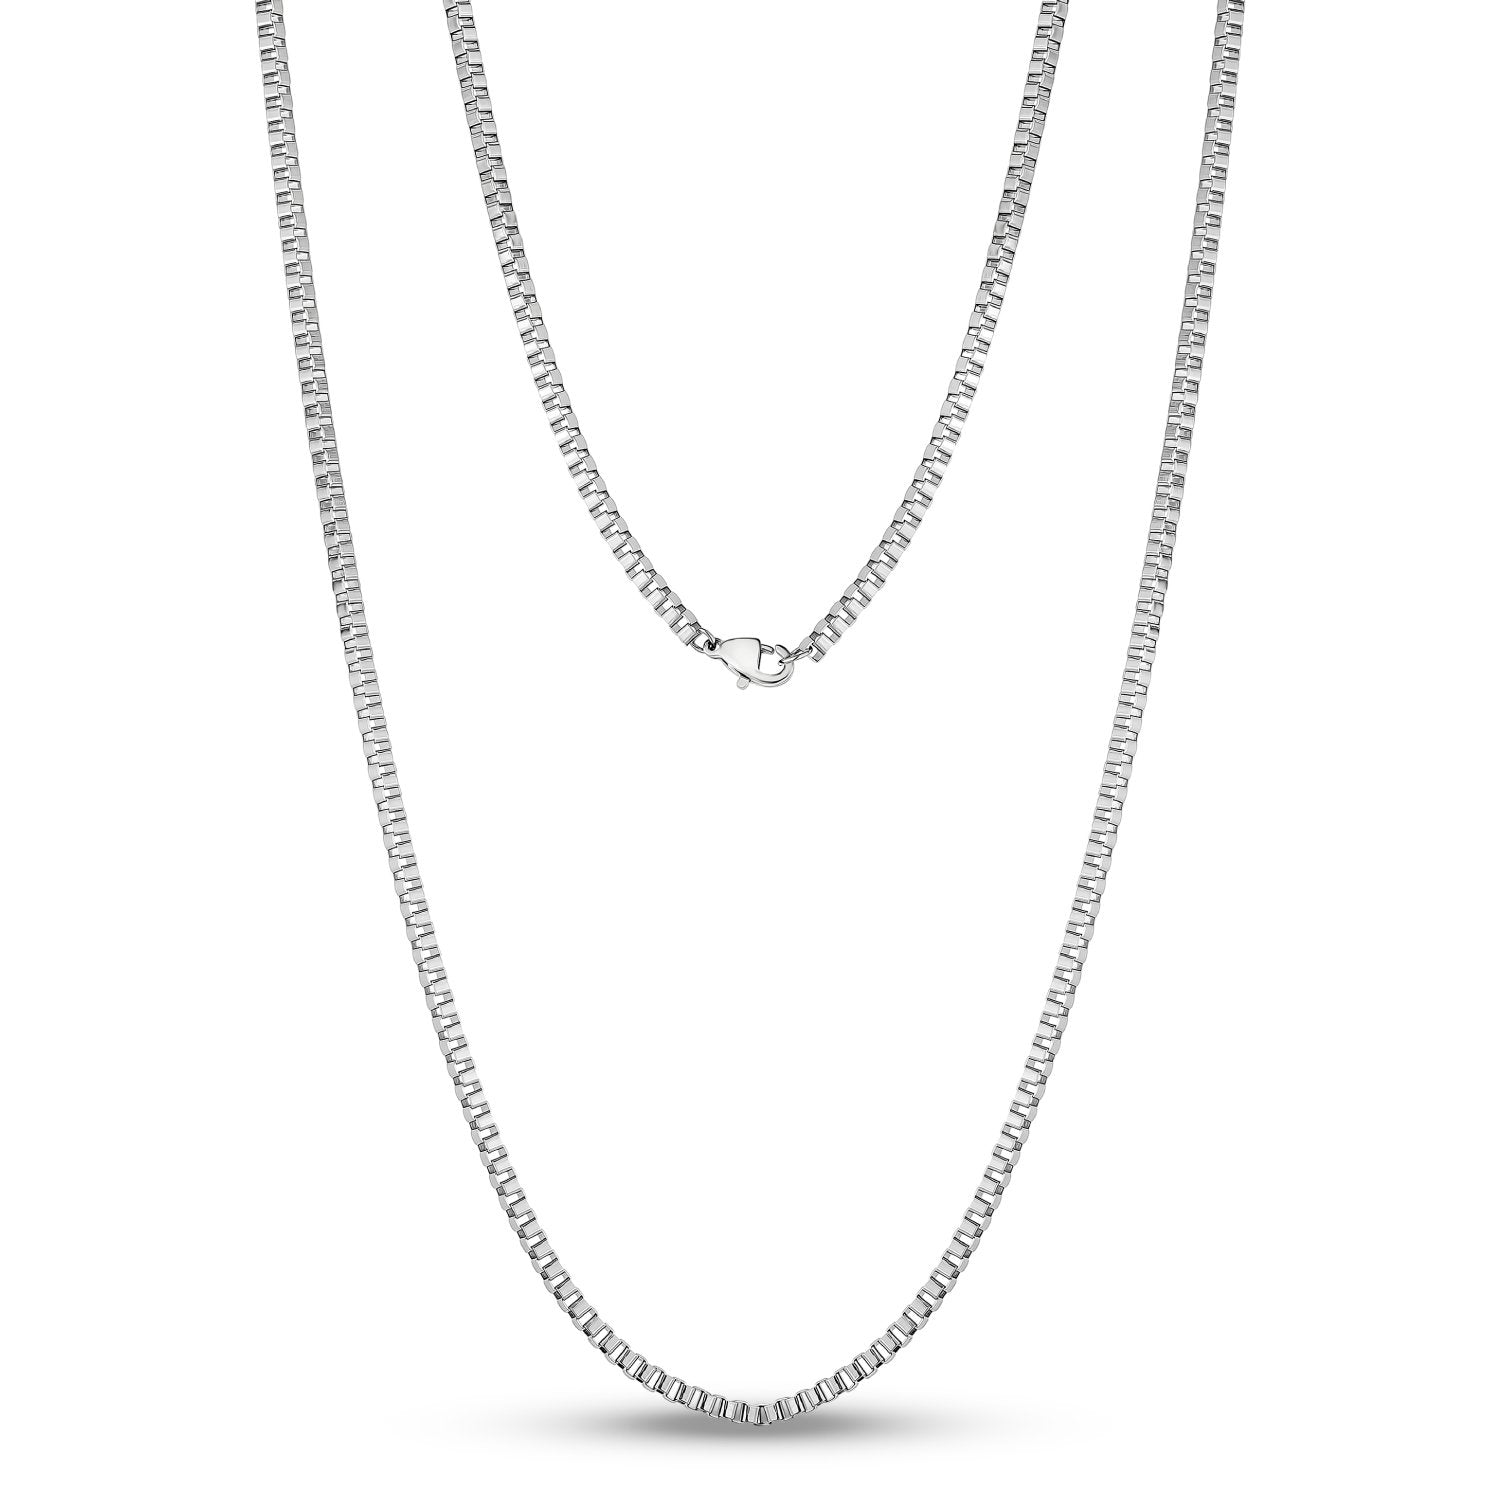 Buy Verona JewelersSterling Silver 2MM, 2.5MM, 3MM, 4MM, 5MM Solid Round  Snake Chain Necklace- Flexible Snake Chain Necklace, Round 925 Sterling  Silver Necklace,Made In Italy, Men and Women Jewelry Gadgets Online at